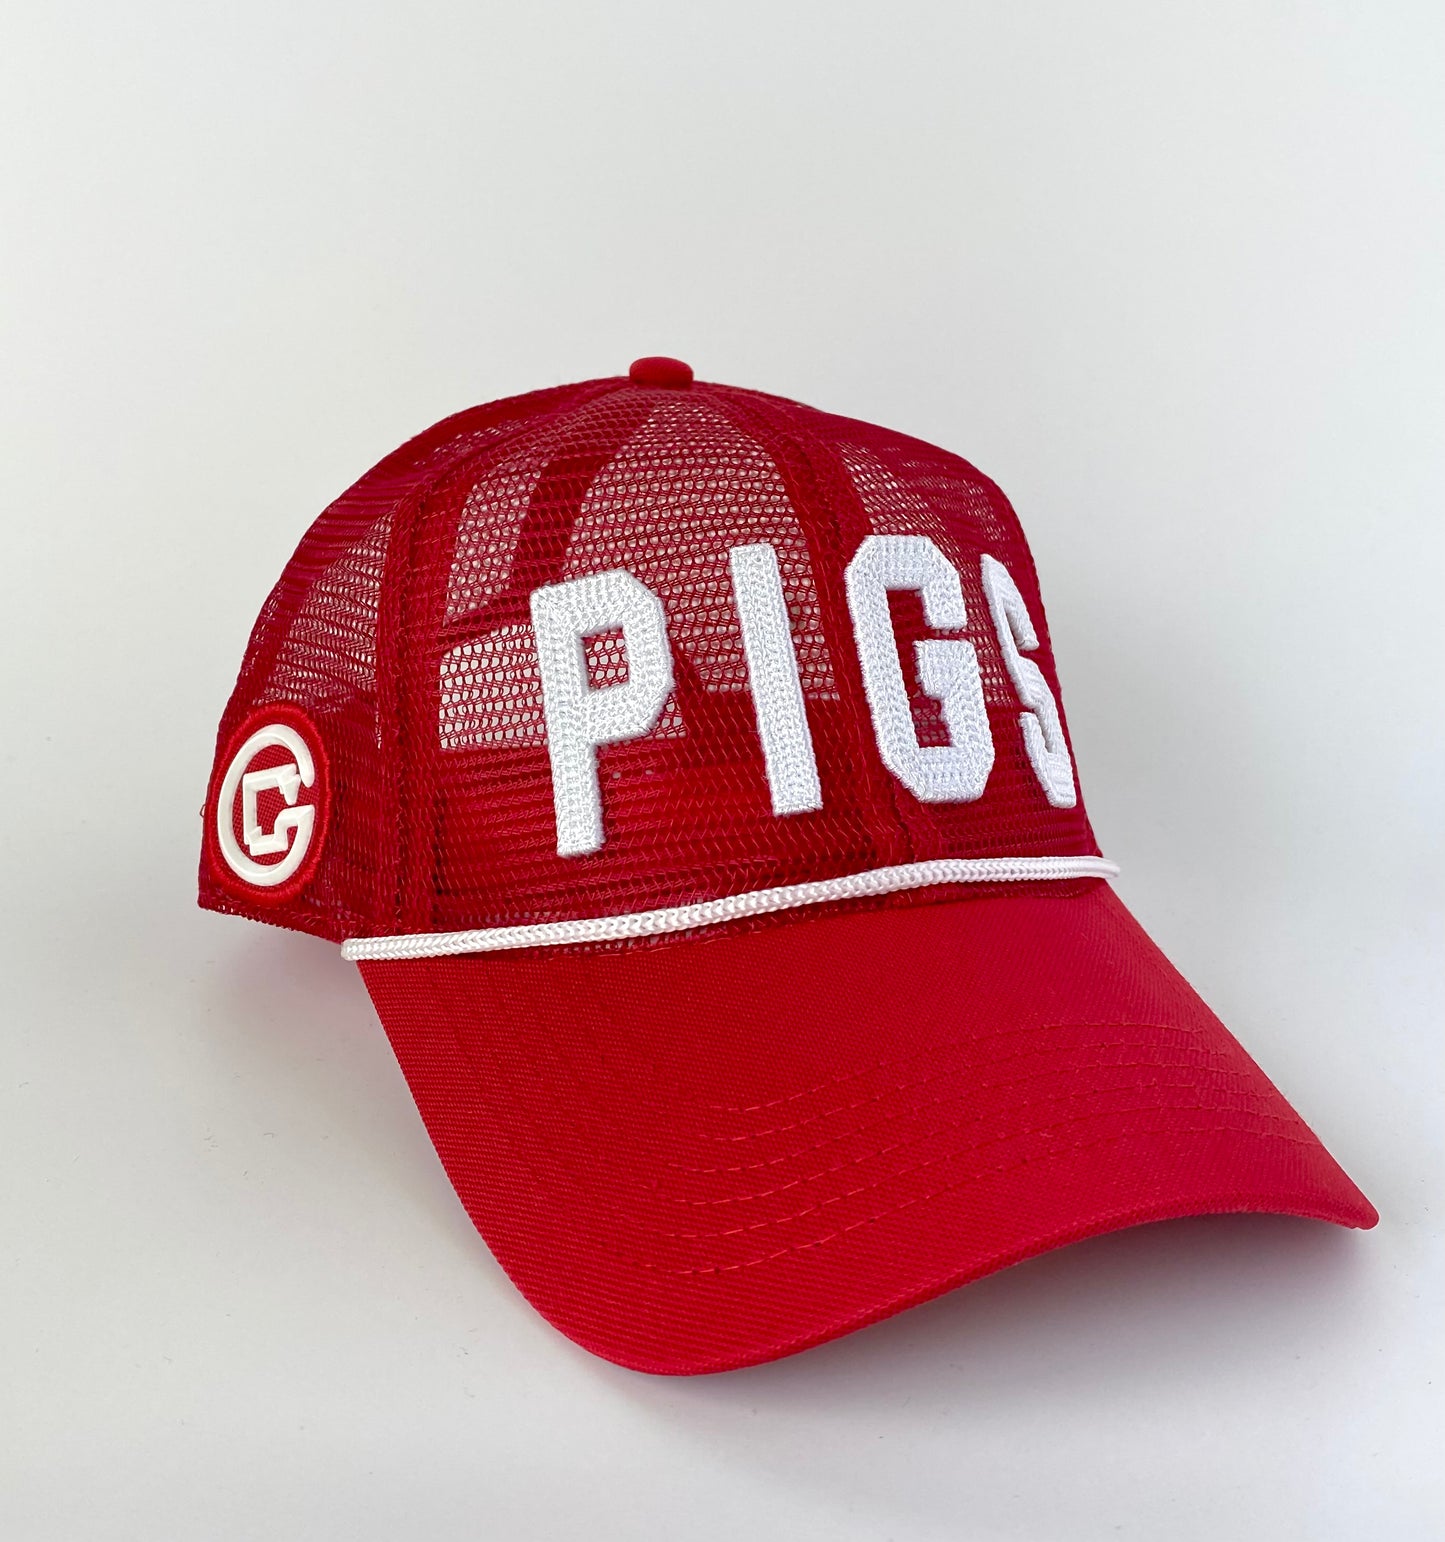 PIGS Wrap around Mesh- Red Curved